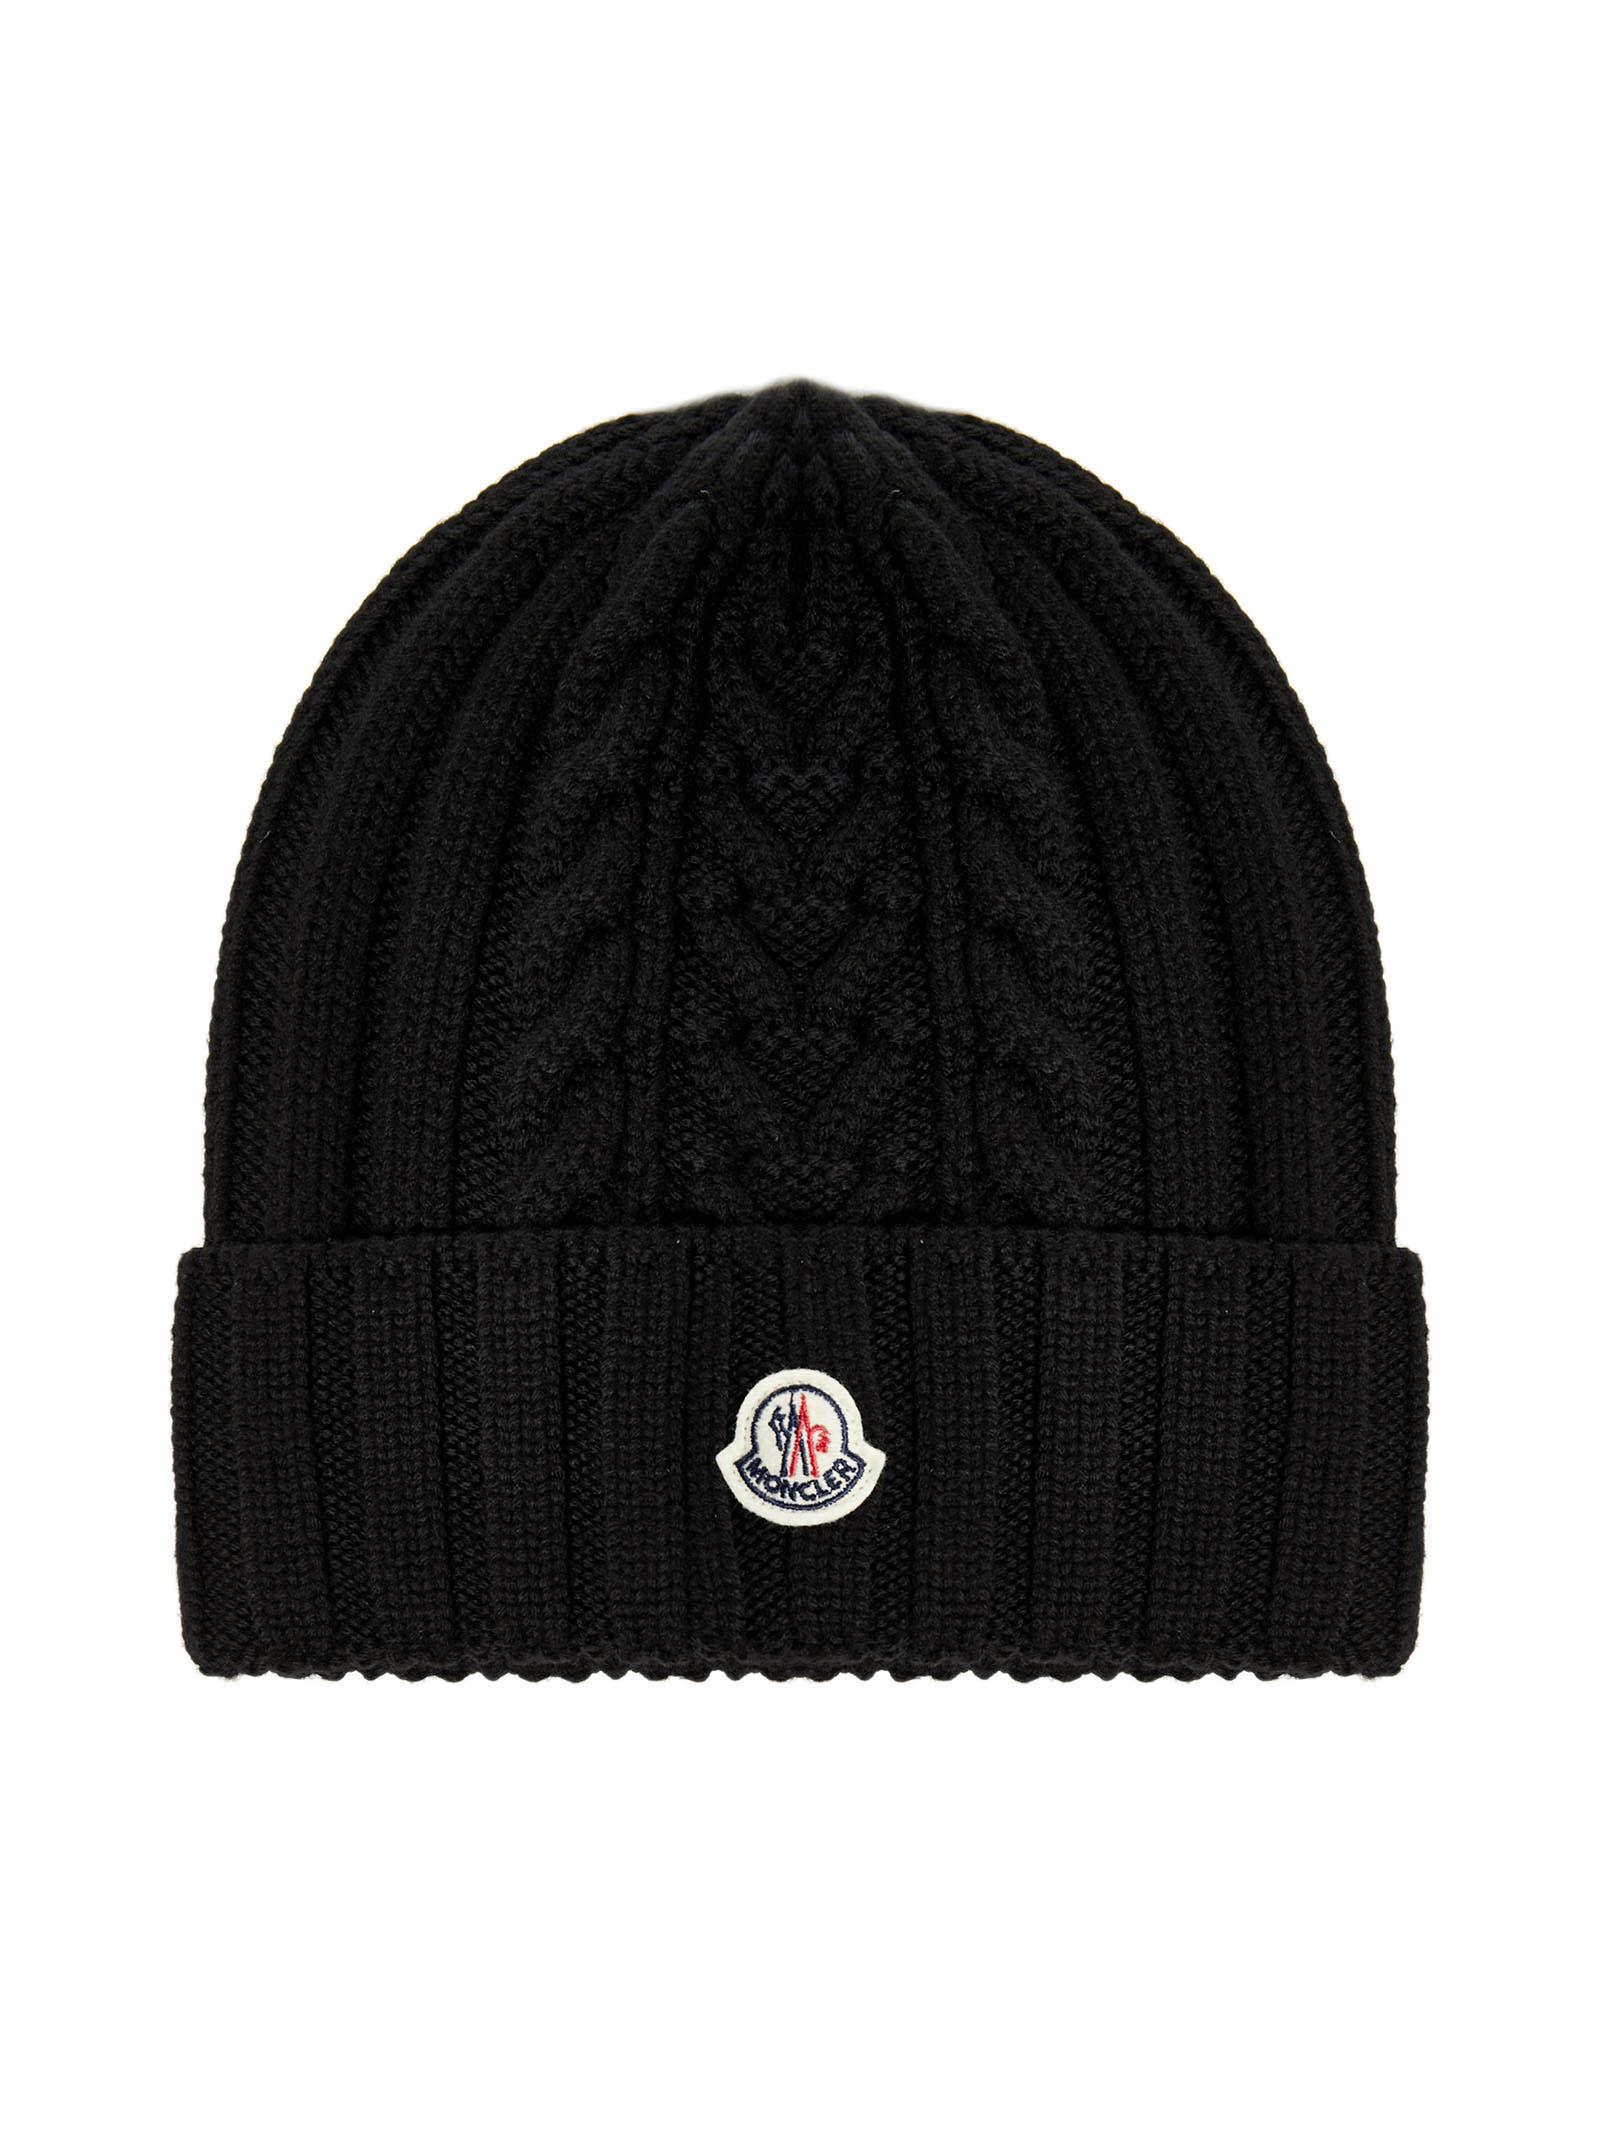 Moncler Wool Logo Patch Ribbed Knit Beanie in Black - Lyst